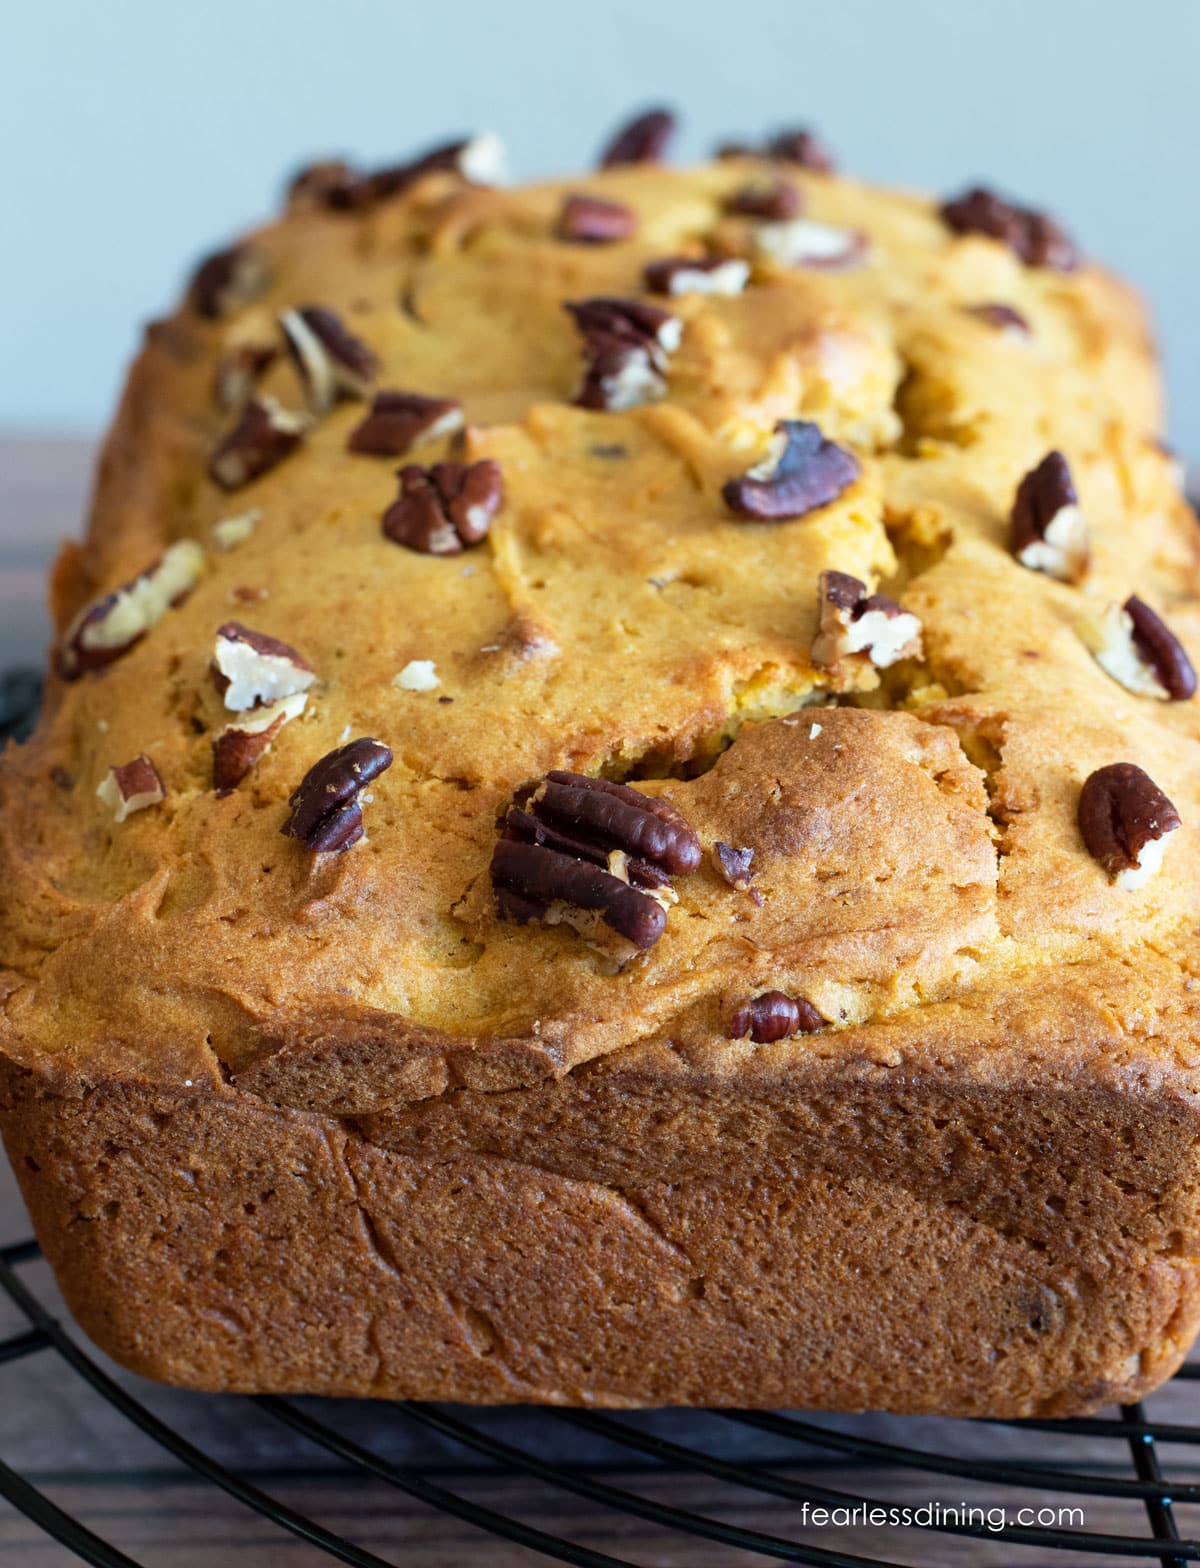 The front view of the baked sweet potato cake loaf.